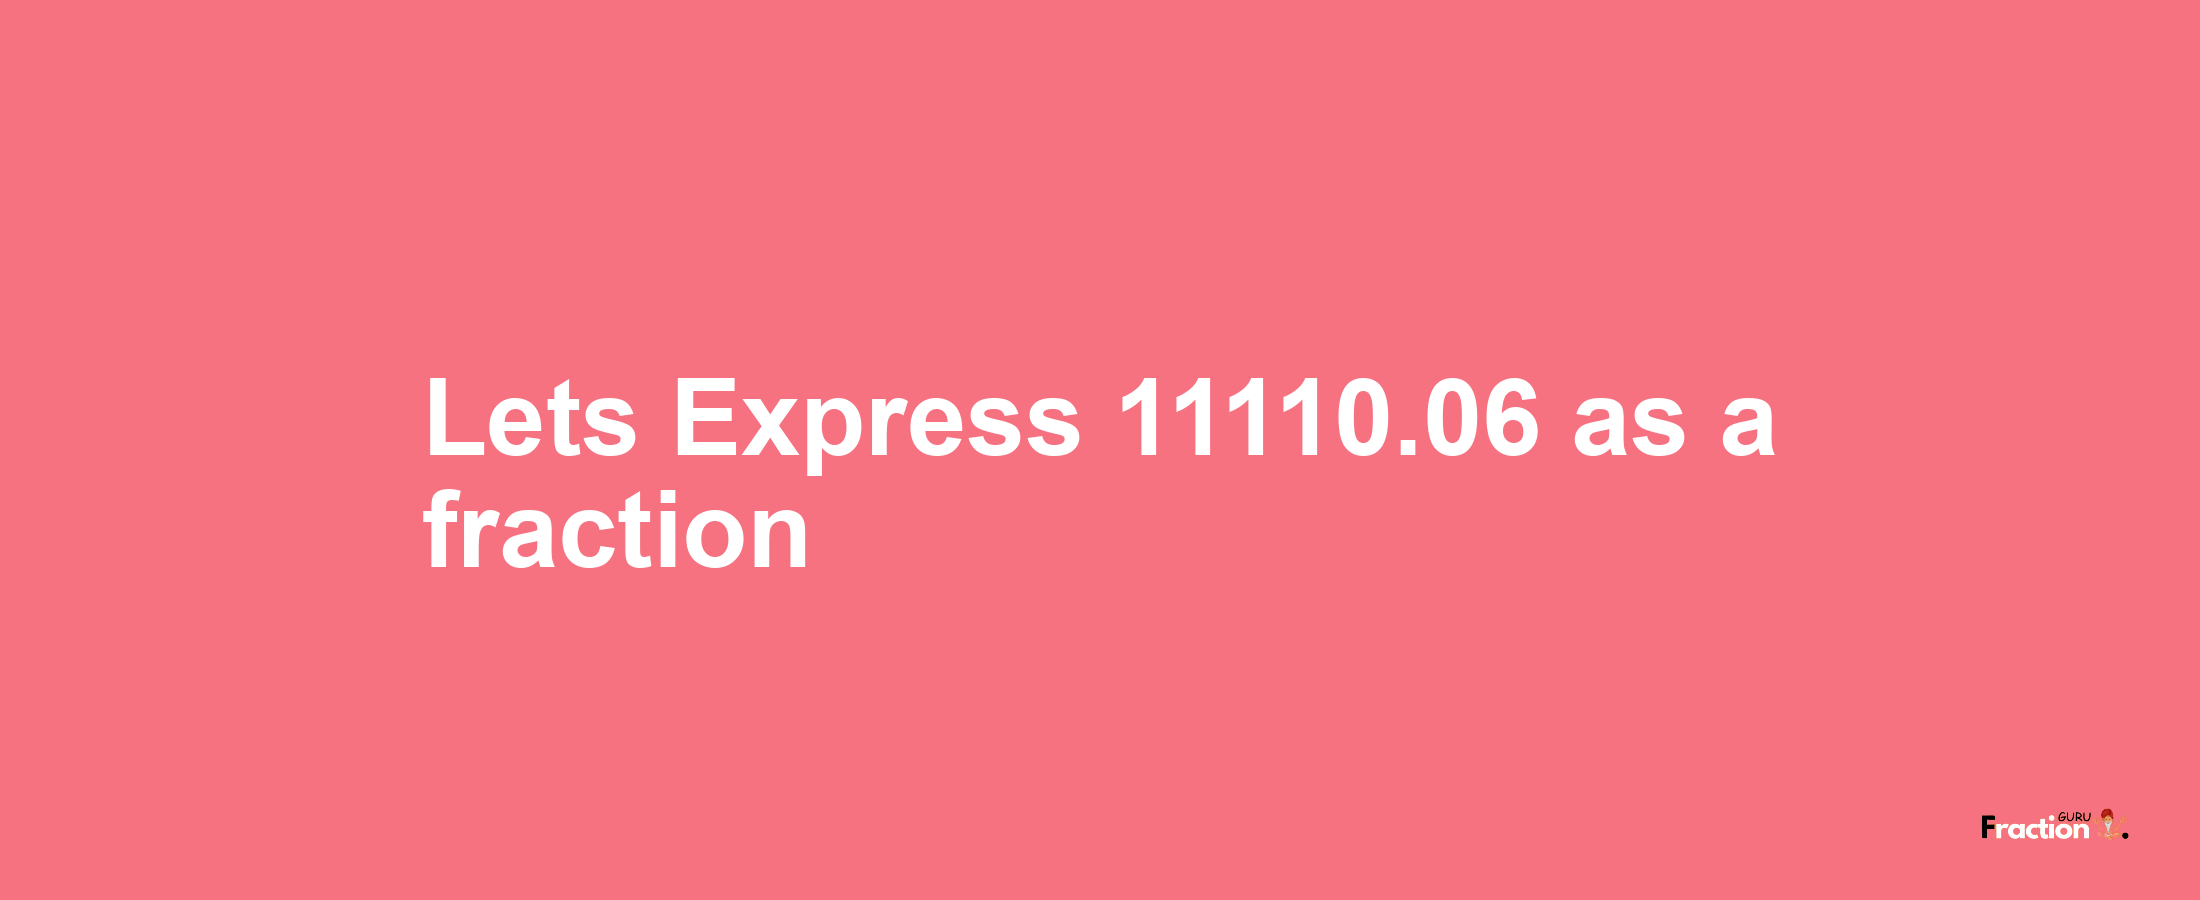 Lets Express 11110.06 as afraction